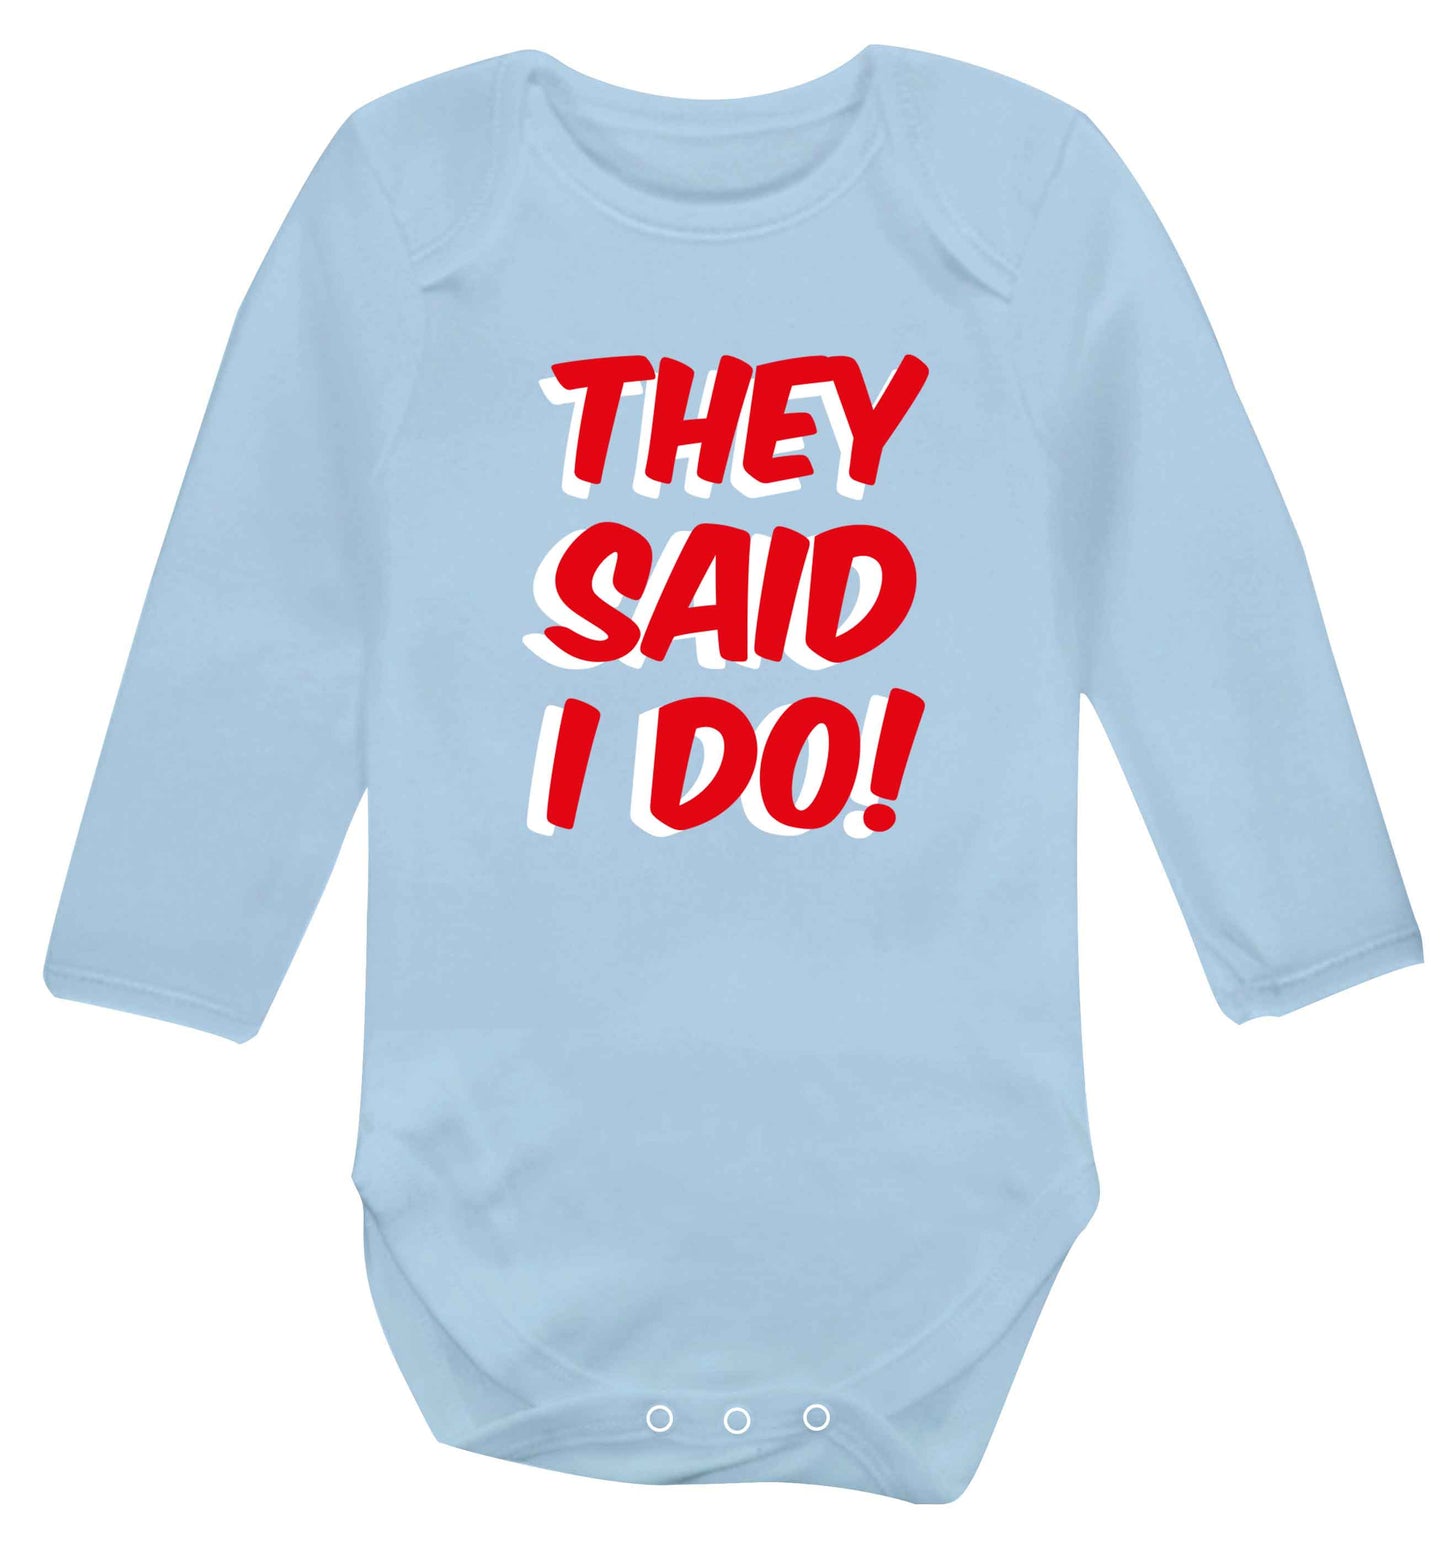 They said I do baby vest long sleeved pale blue 6-12 months